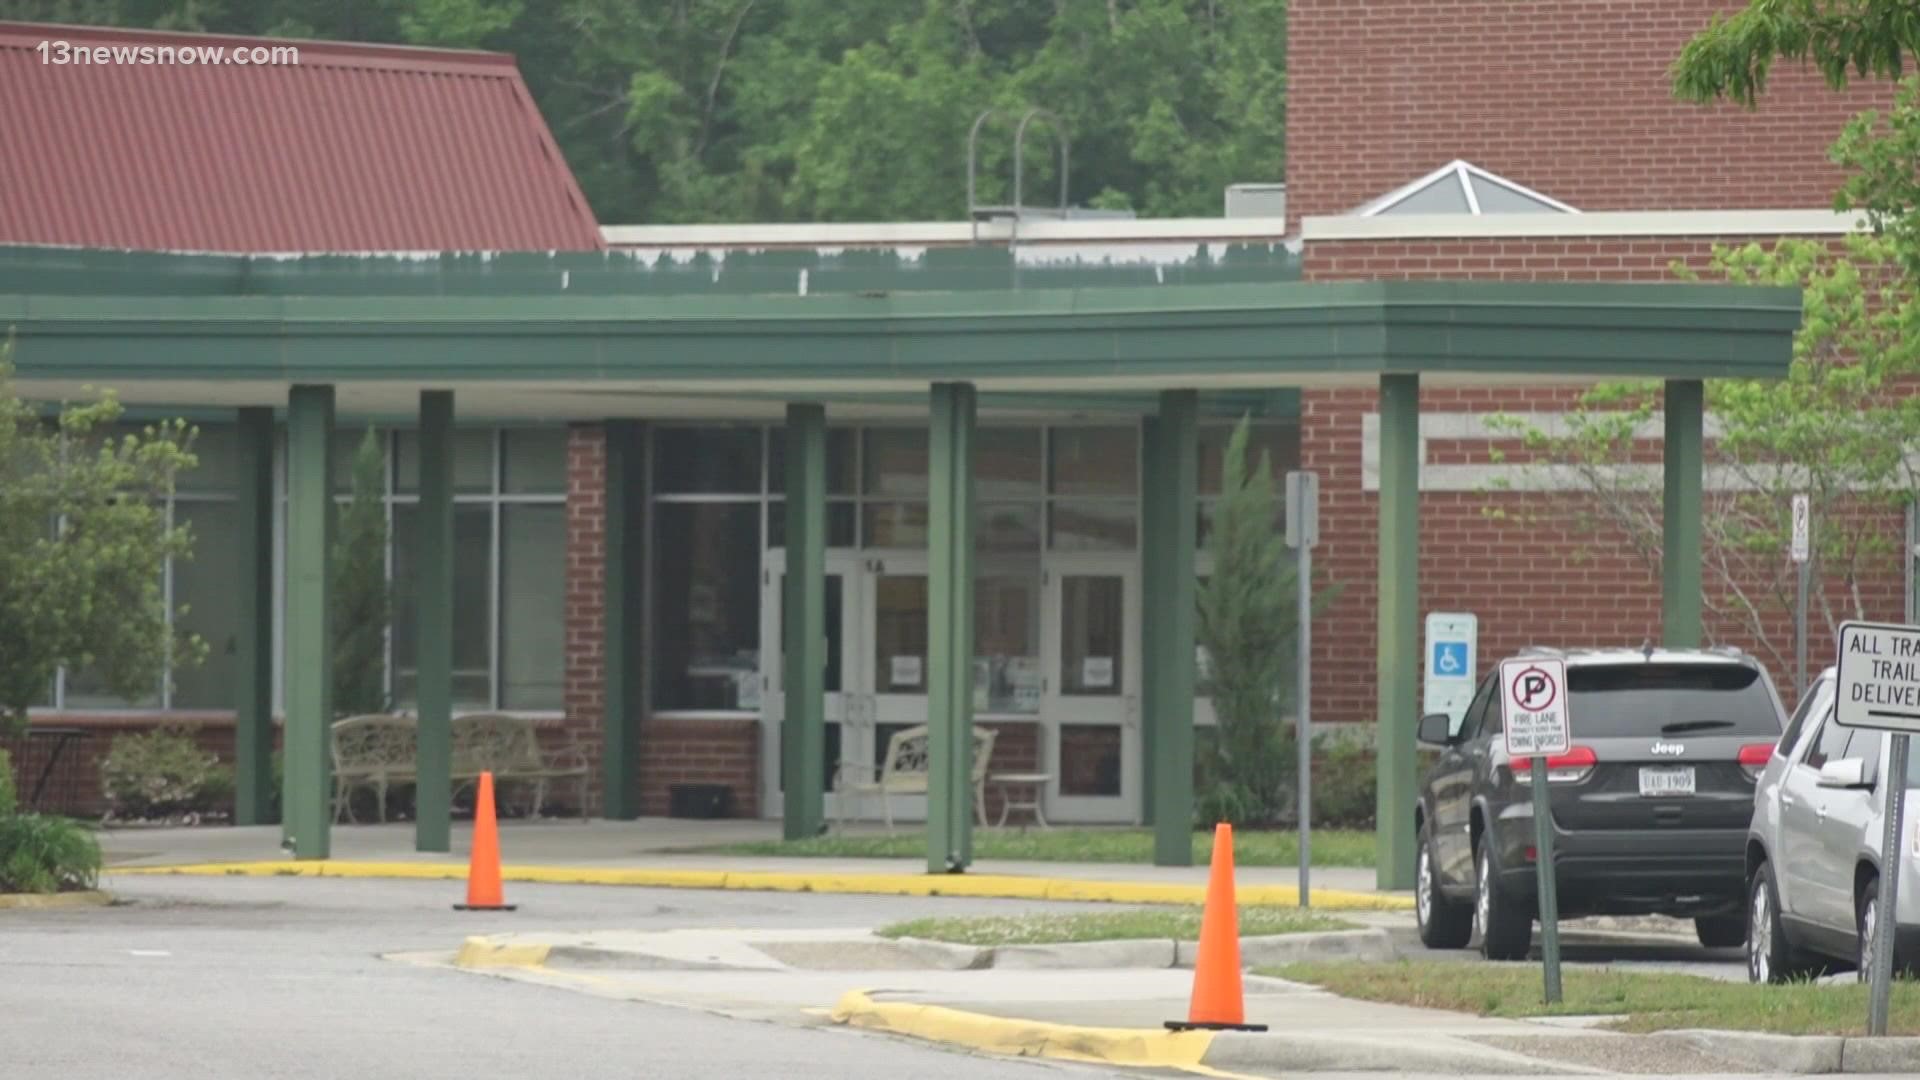 Grassfield Elementary School parents got a letter this week from the principal and the Virginia Department of Health about a contagious virus at the school.